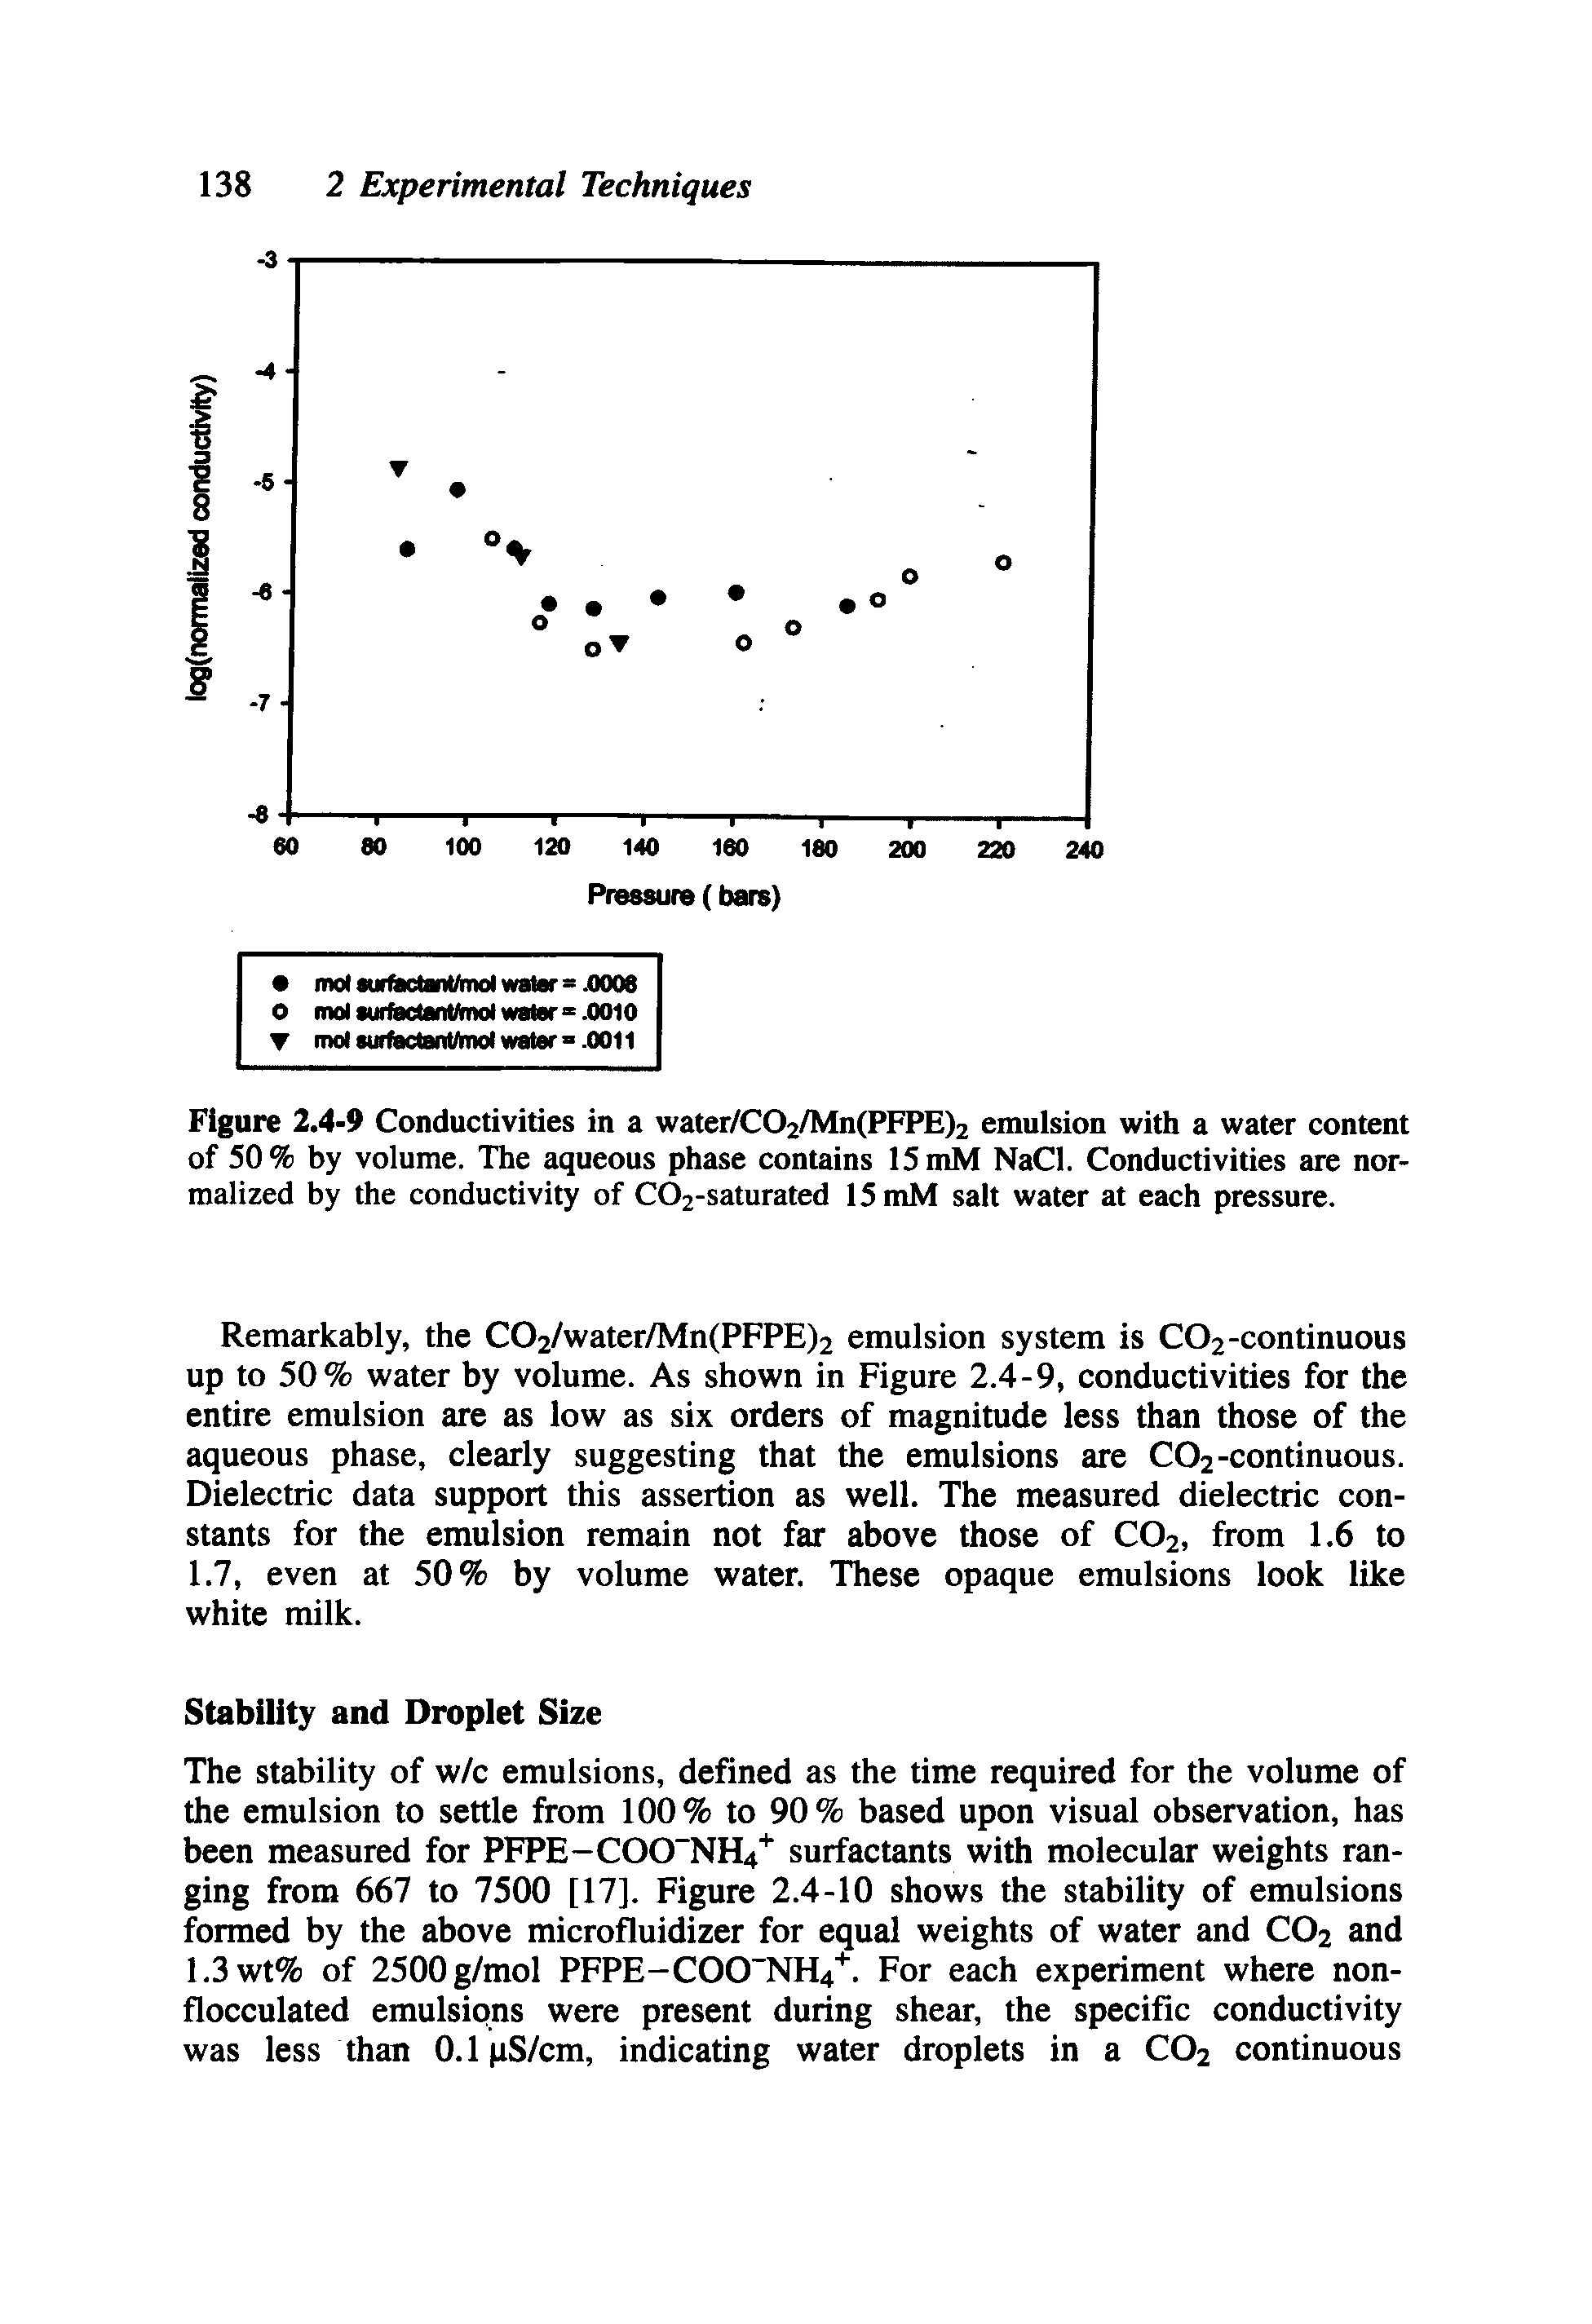 Figure 2.4-9 Conductivities in a water/C02/Mn(PFPE)2 emulsion with a water content of 50% by volume. The aqueous phase contains 15 mM NaCl. Conductivities are normalized by the conductivity of C02-saturated 15mM salt water at each pressure.